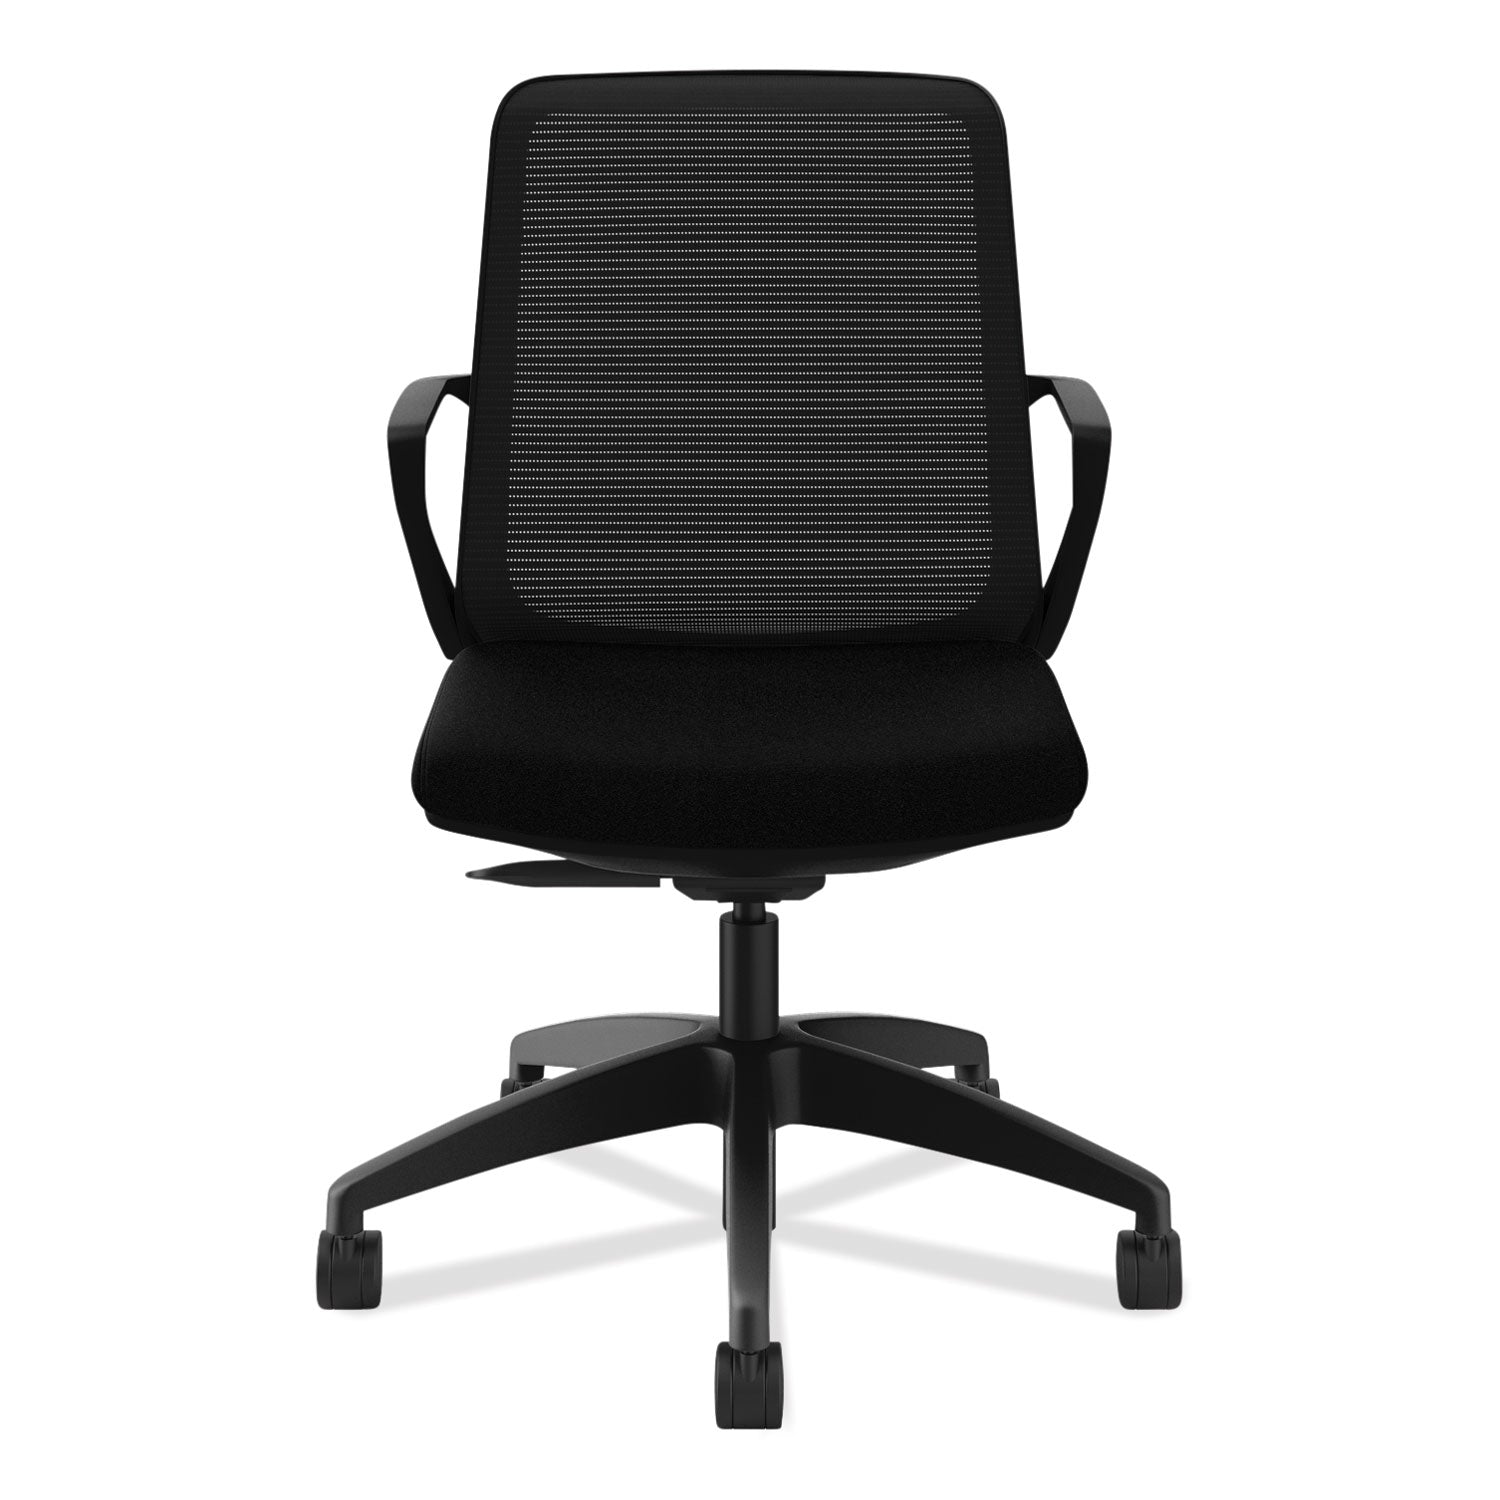 cliq-office-chair-supports-up-to-300-lb-17-to-22-seat-height-black-seat-back-black-base-ships-in-7-10-business-days_honclqimcu10t - 2